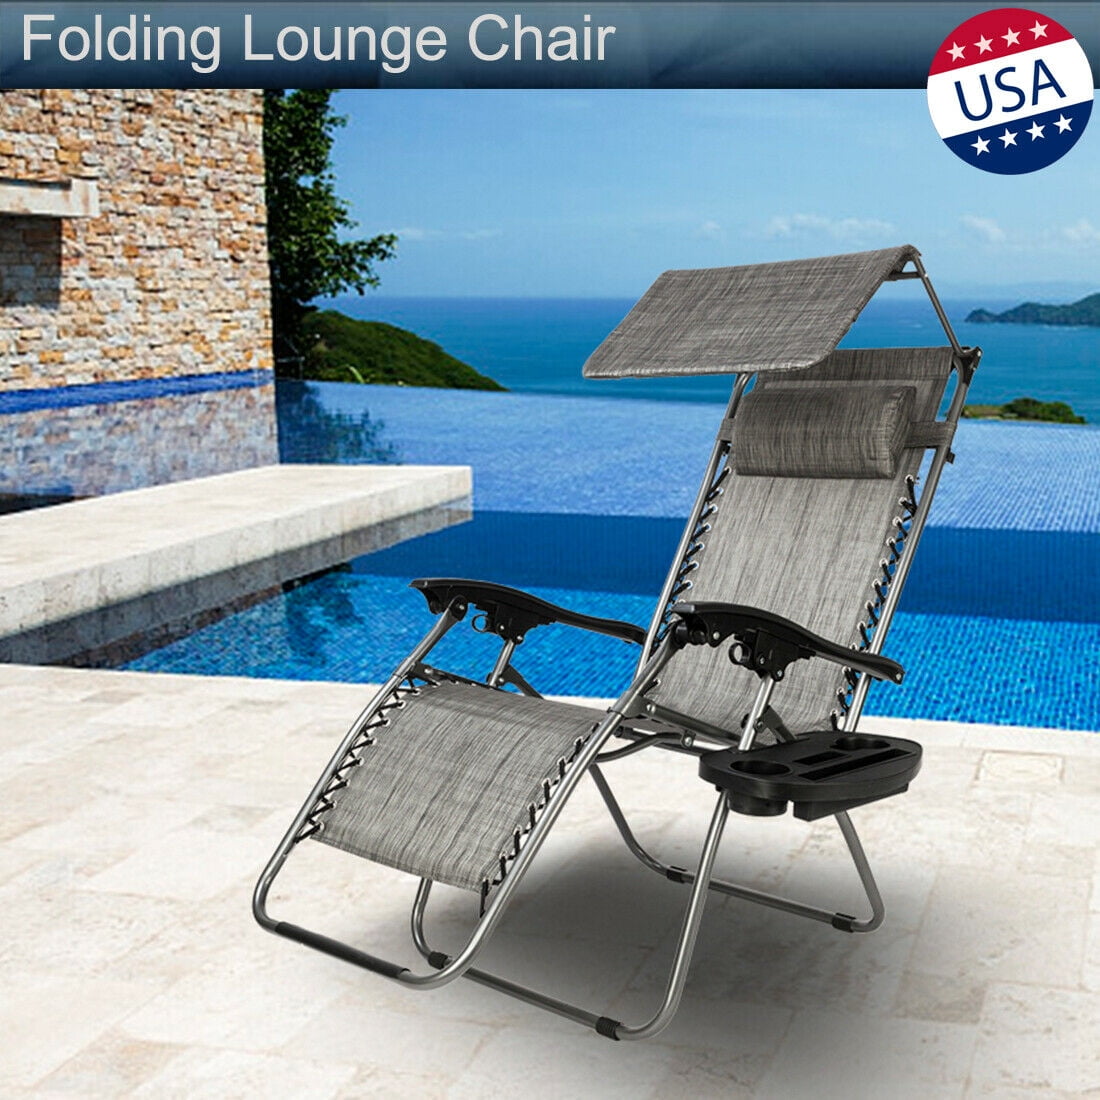 4 Reclining Positions Balcony,Sandy Beach. Sunshade,Recliner Chair,Patio Chaise Lounge Chair Zerone Outdoor Portable Folding Lounge Chair,with Umbrella Outdoor Reclining Chaise for Garden